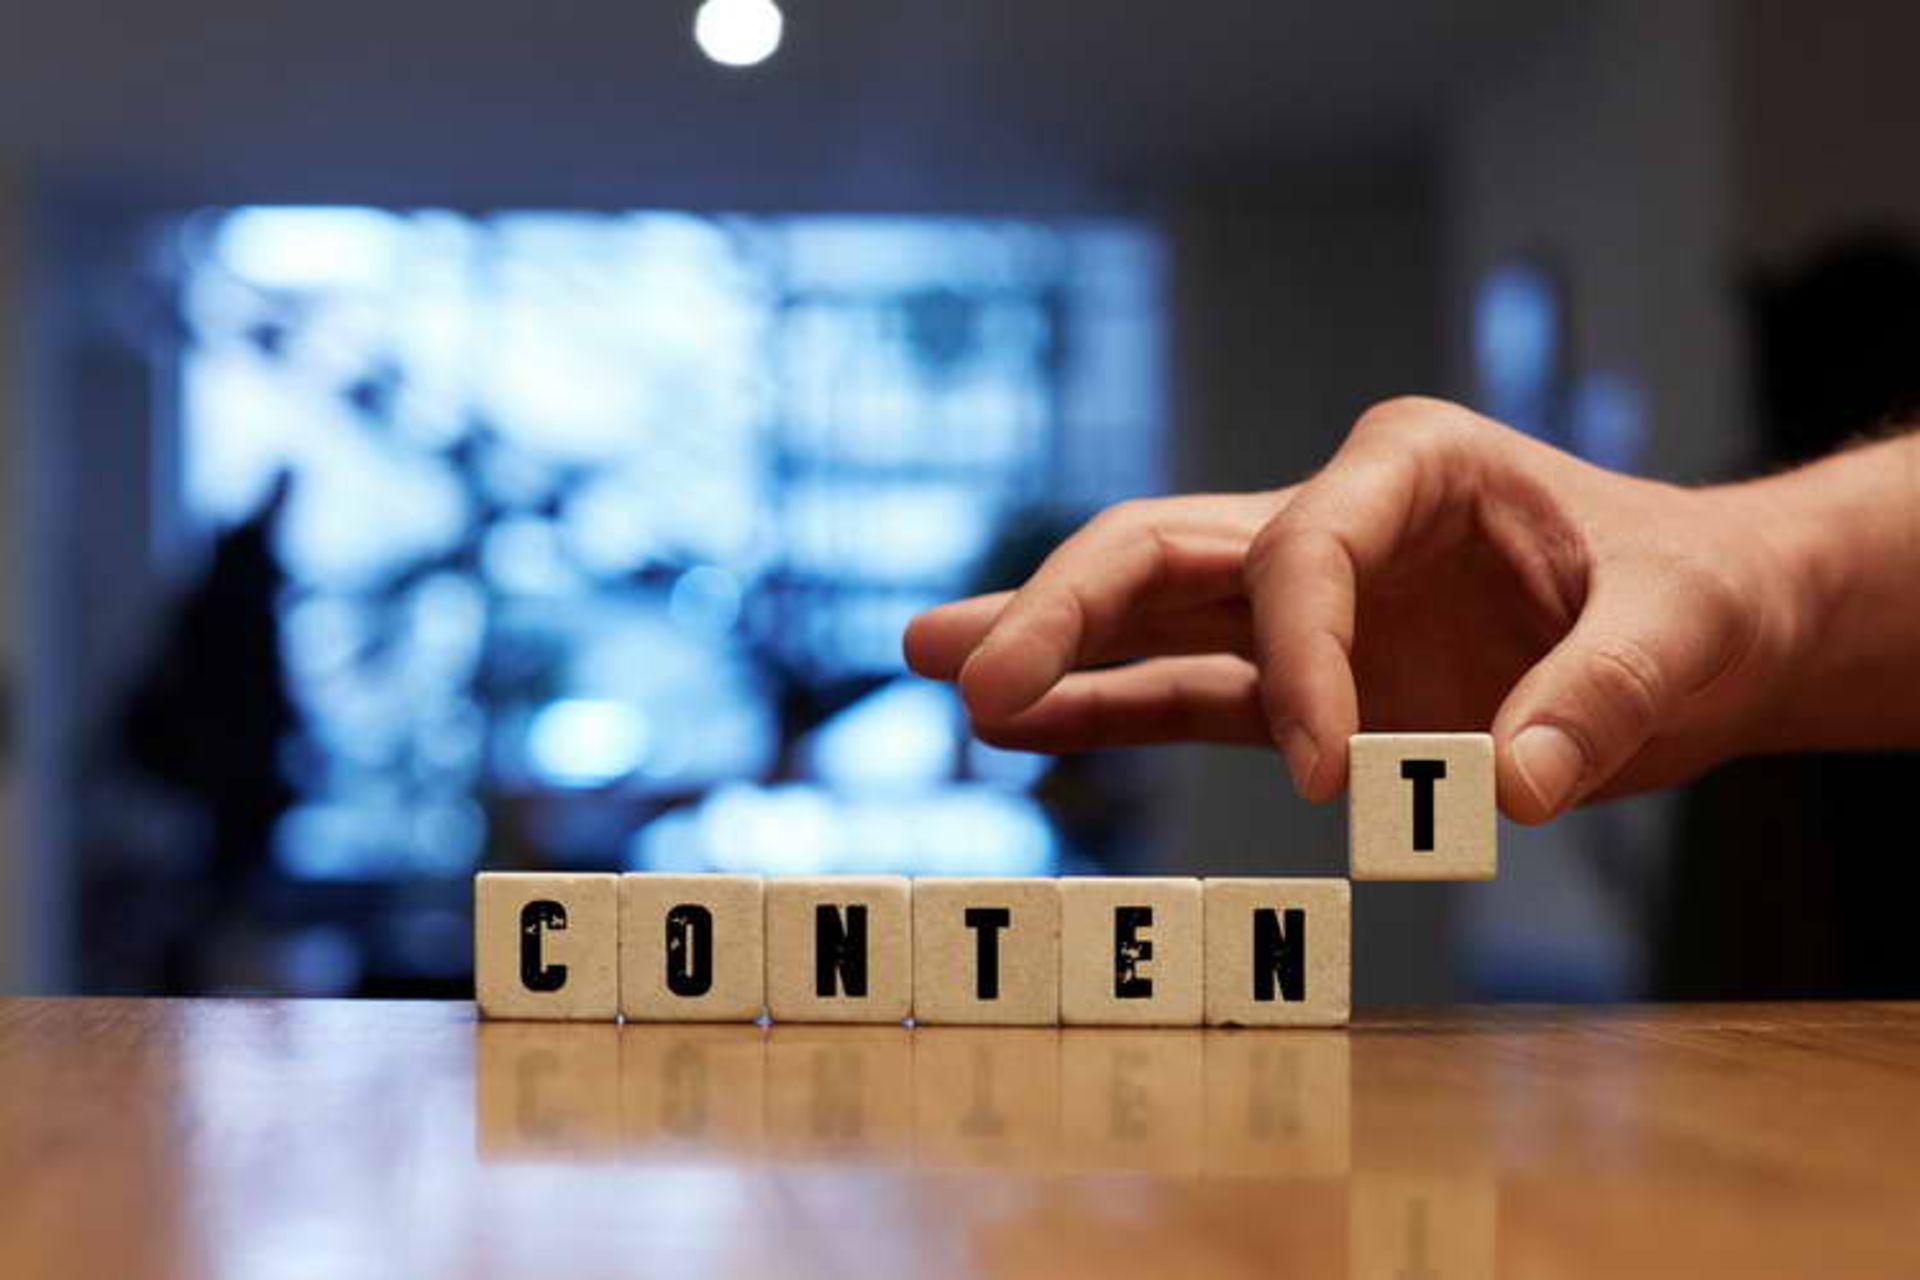 how your buyers consume content